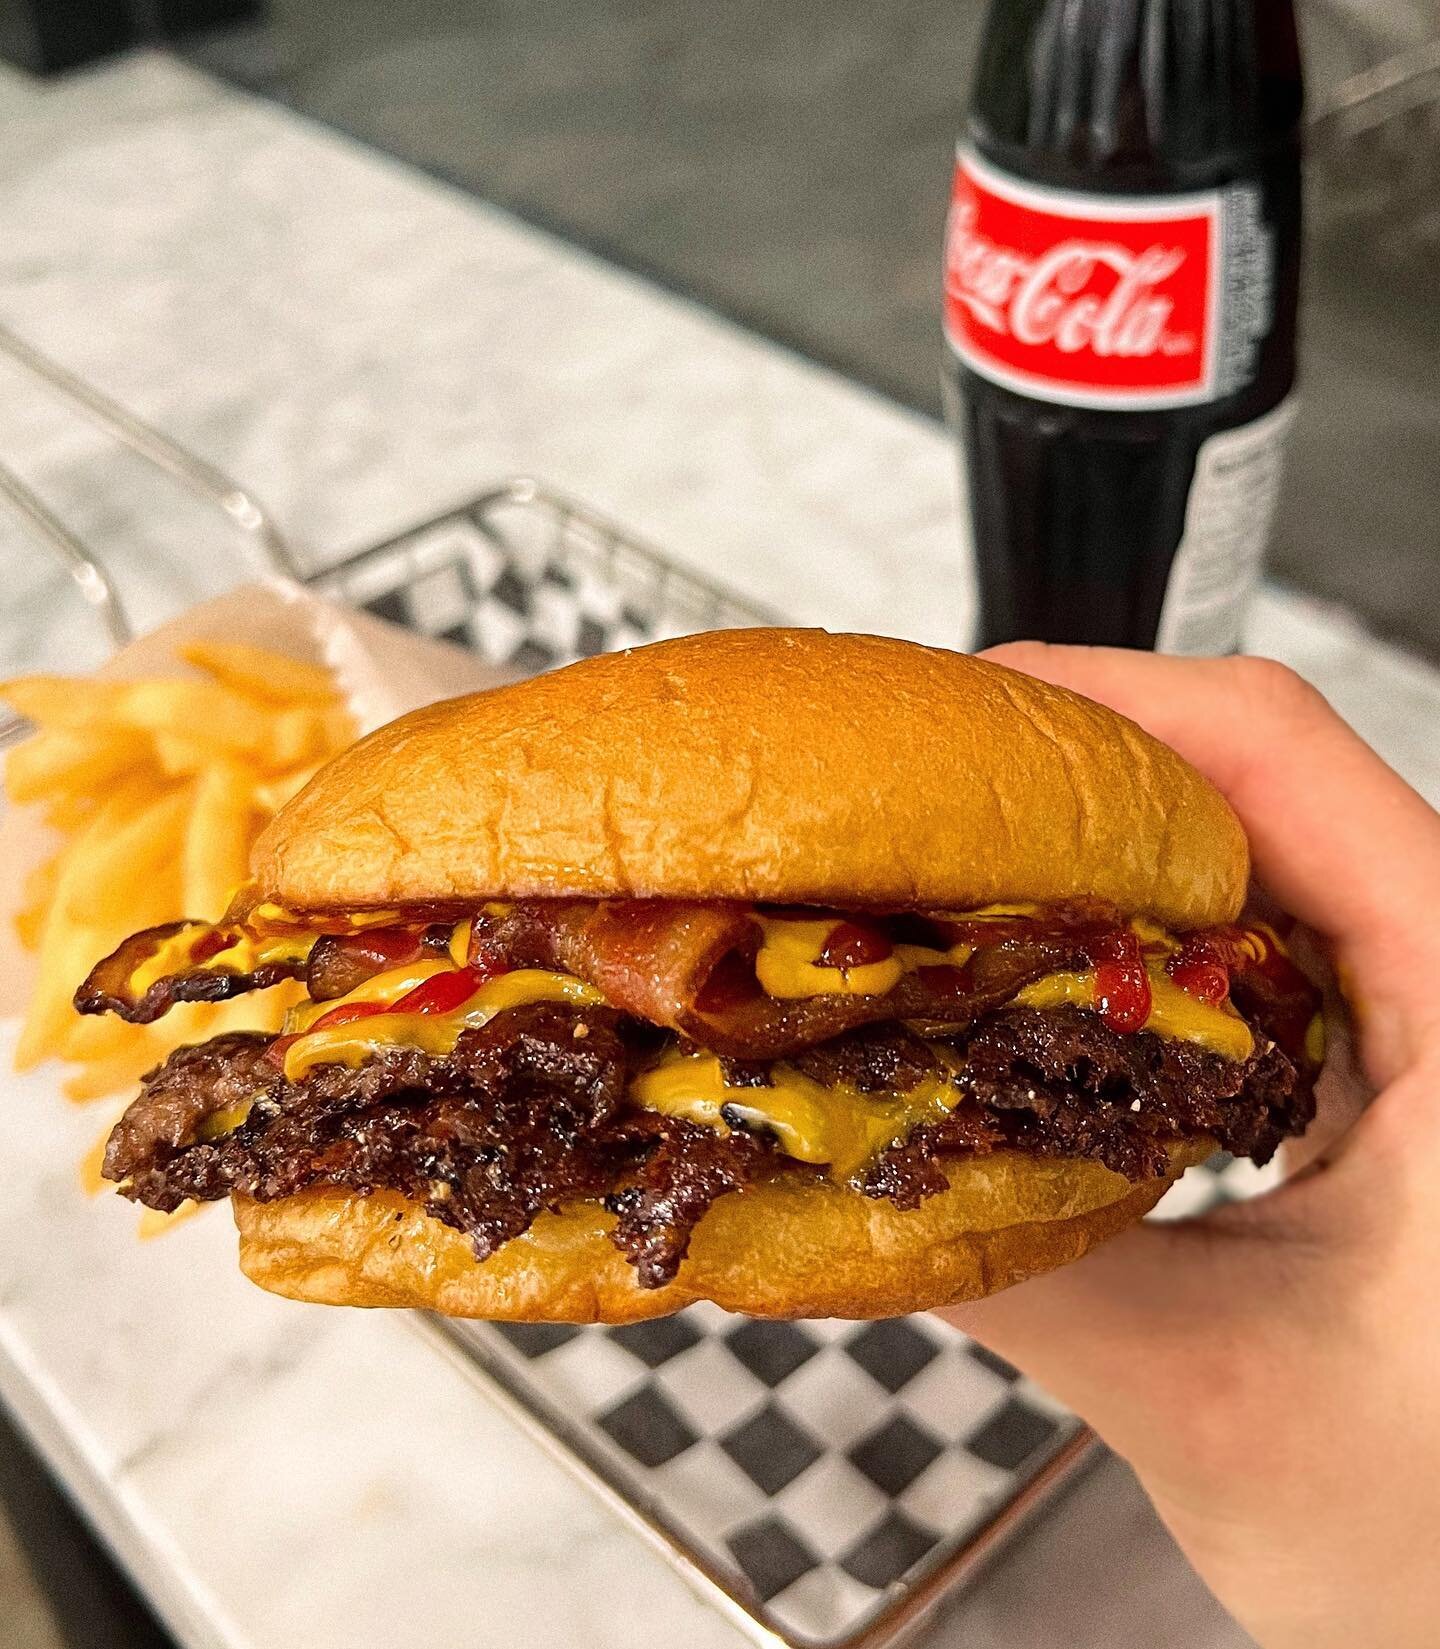 What&rsquo;s for dinner? Swing by for burgers, fries and a refreshing @cocacola 🔥 We&rsquo;re also on Uber Eats and Caviar for delivery!
.
.
.
.
.
.
.
.
.
.
.
.
.
.
.
#bayareafood #oakland #lanasoakland #eats #foodstagram #delicious #burger #support